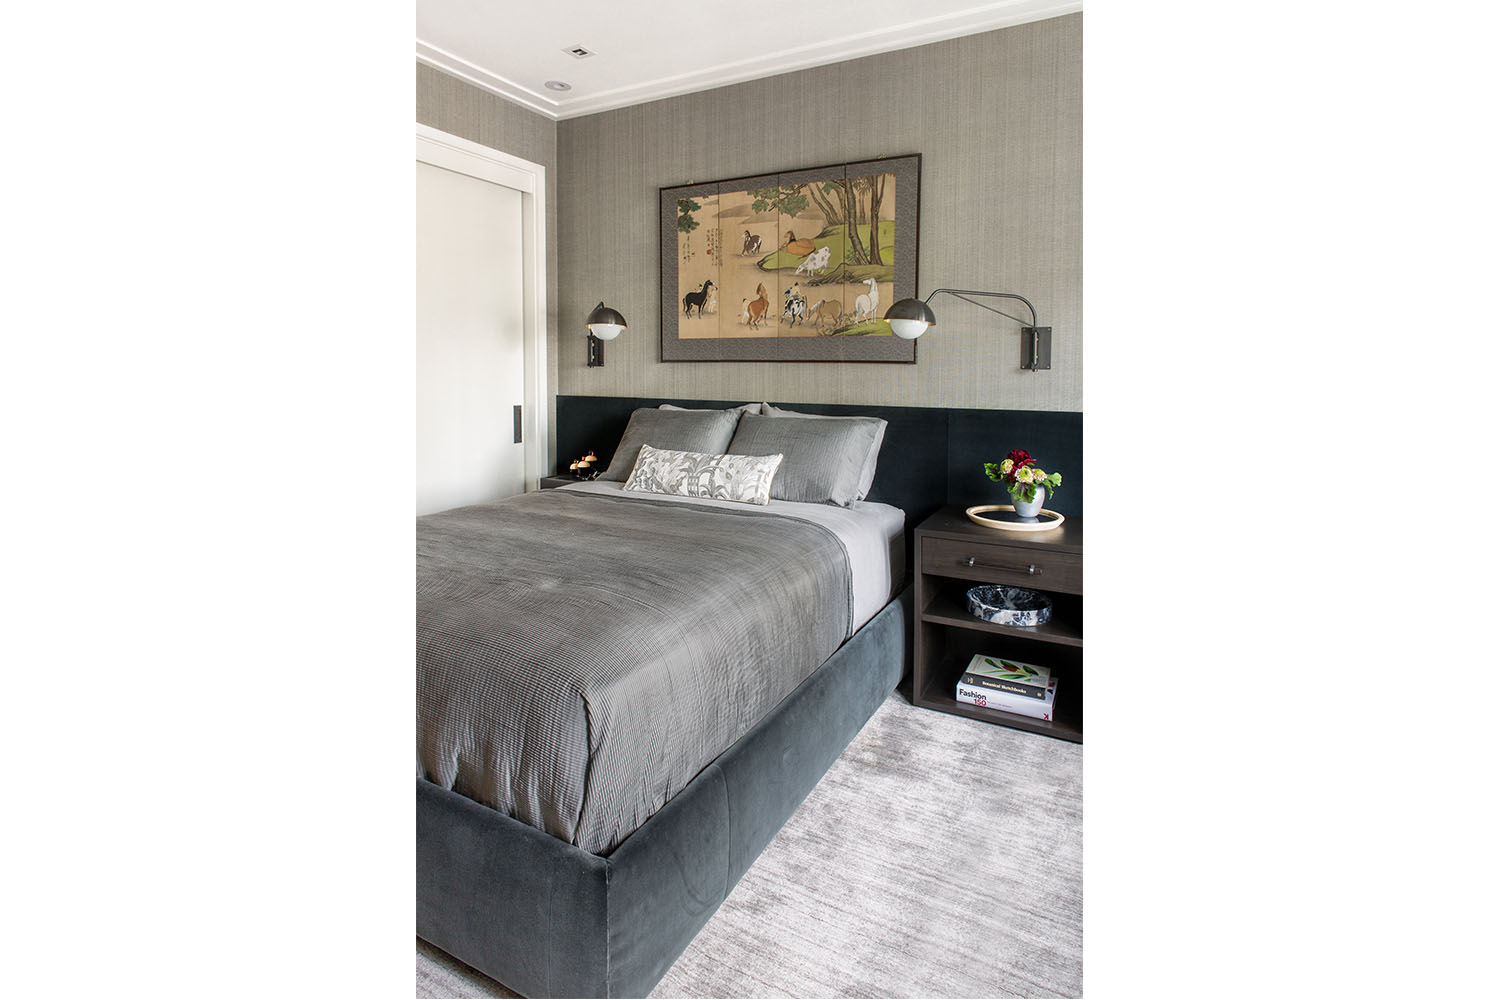 Luxury Residential Home Construction - Drake Tower Chicago bedroom